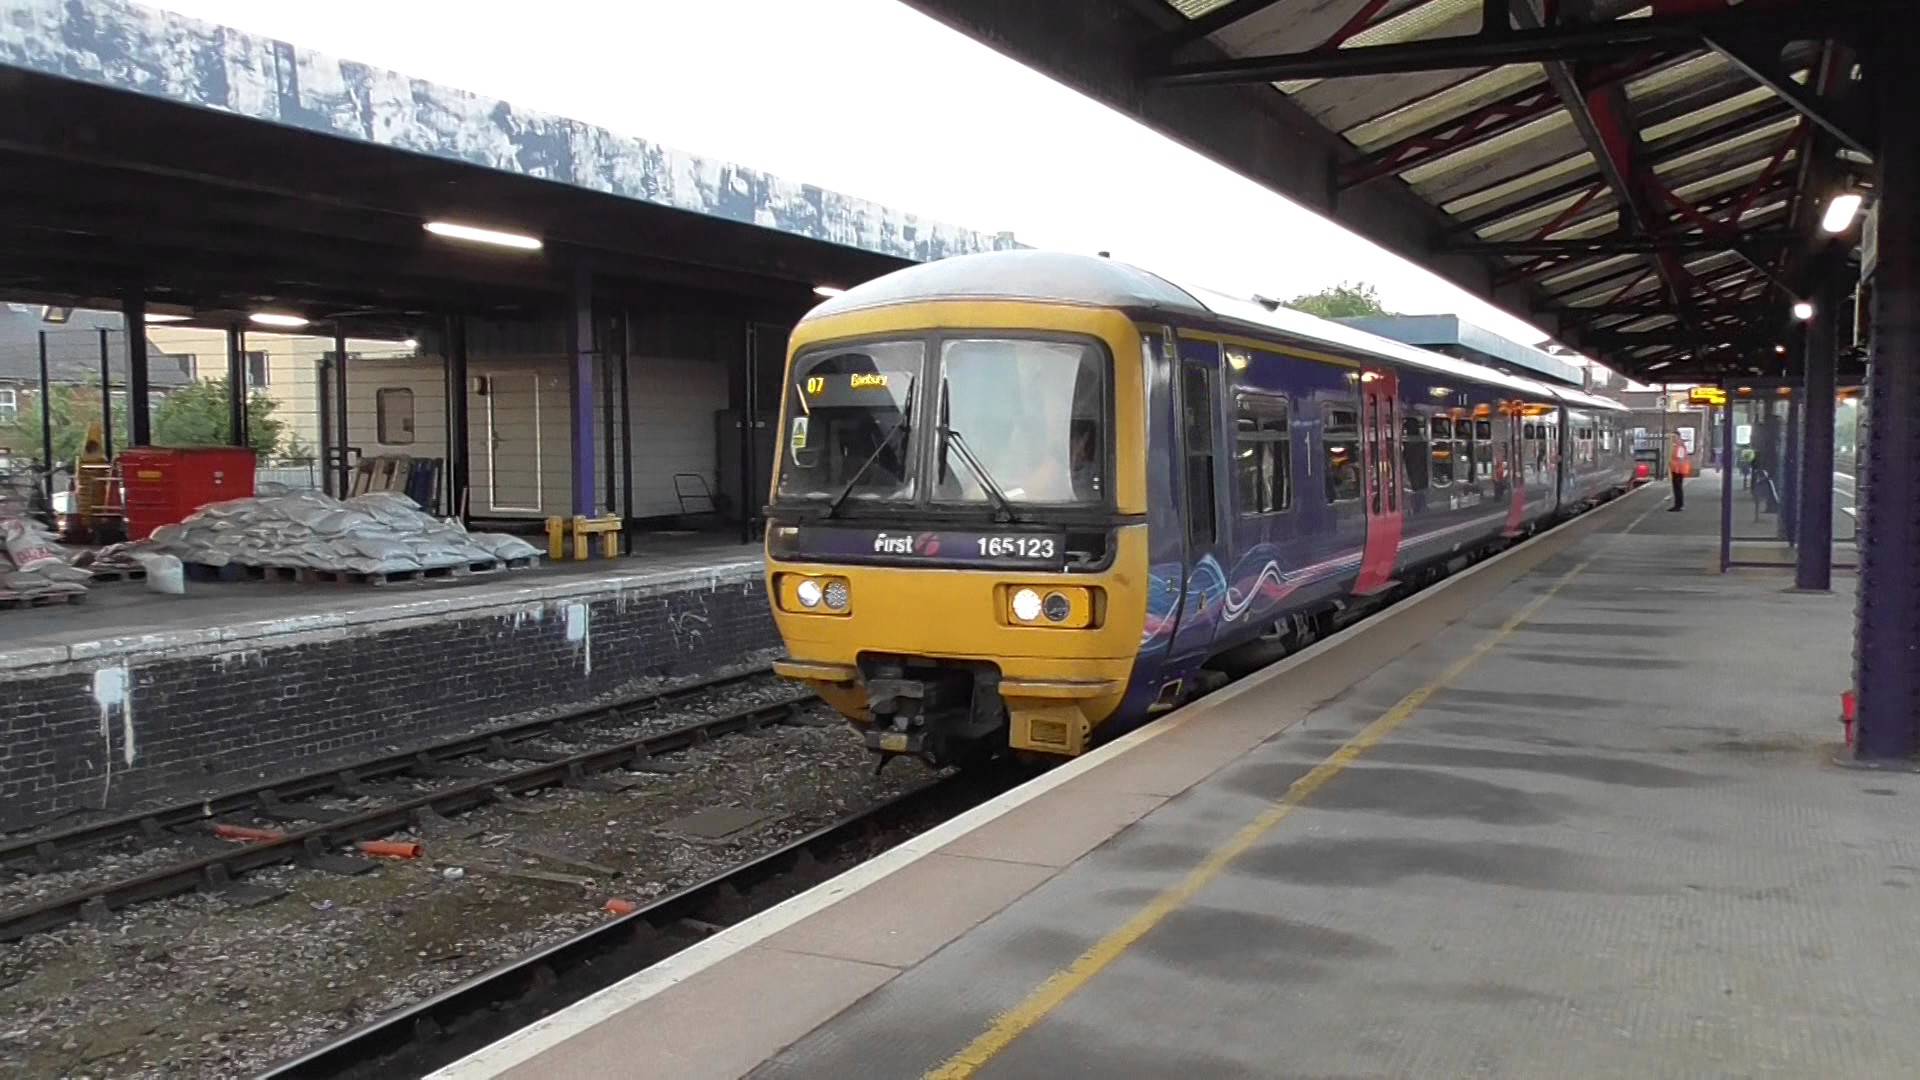 Oxford Railway Station - Saturday 22nd August 2015 - YouTube